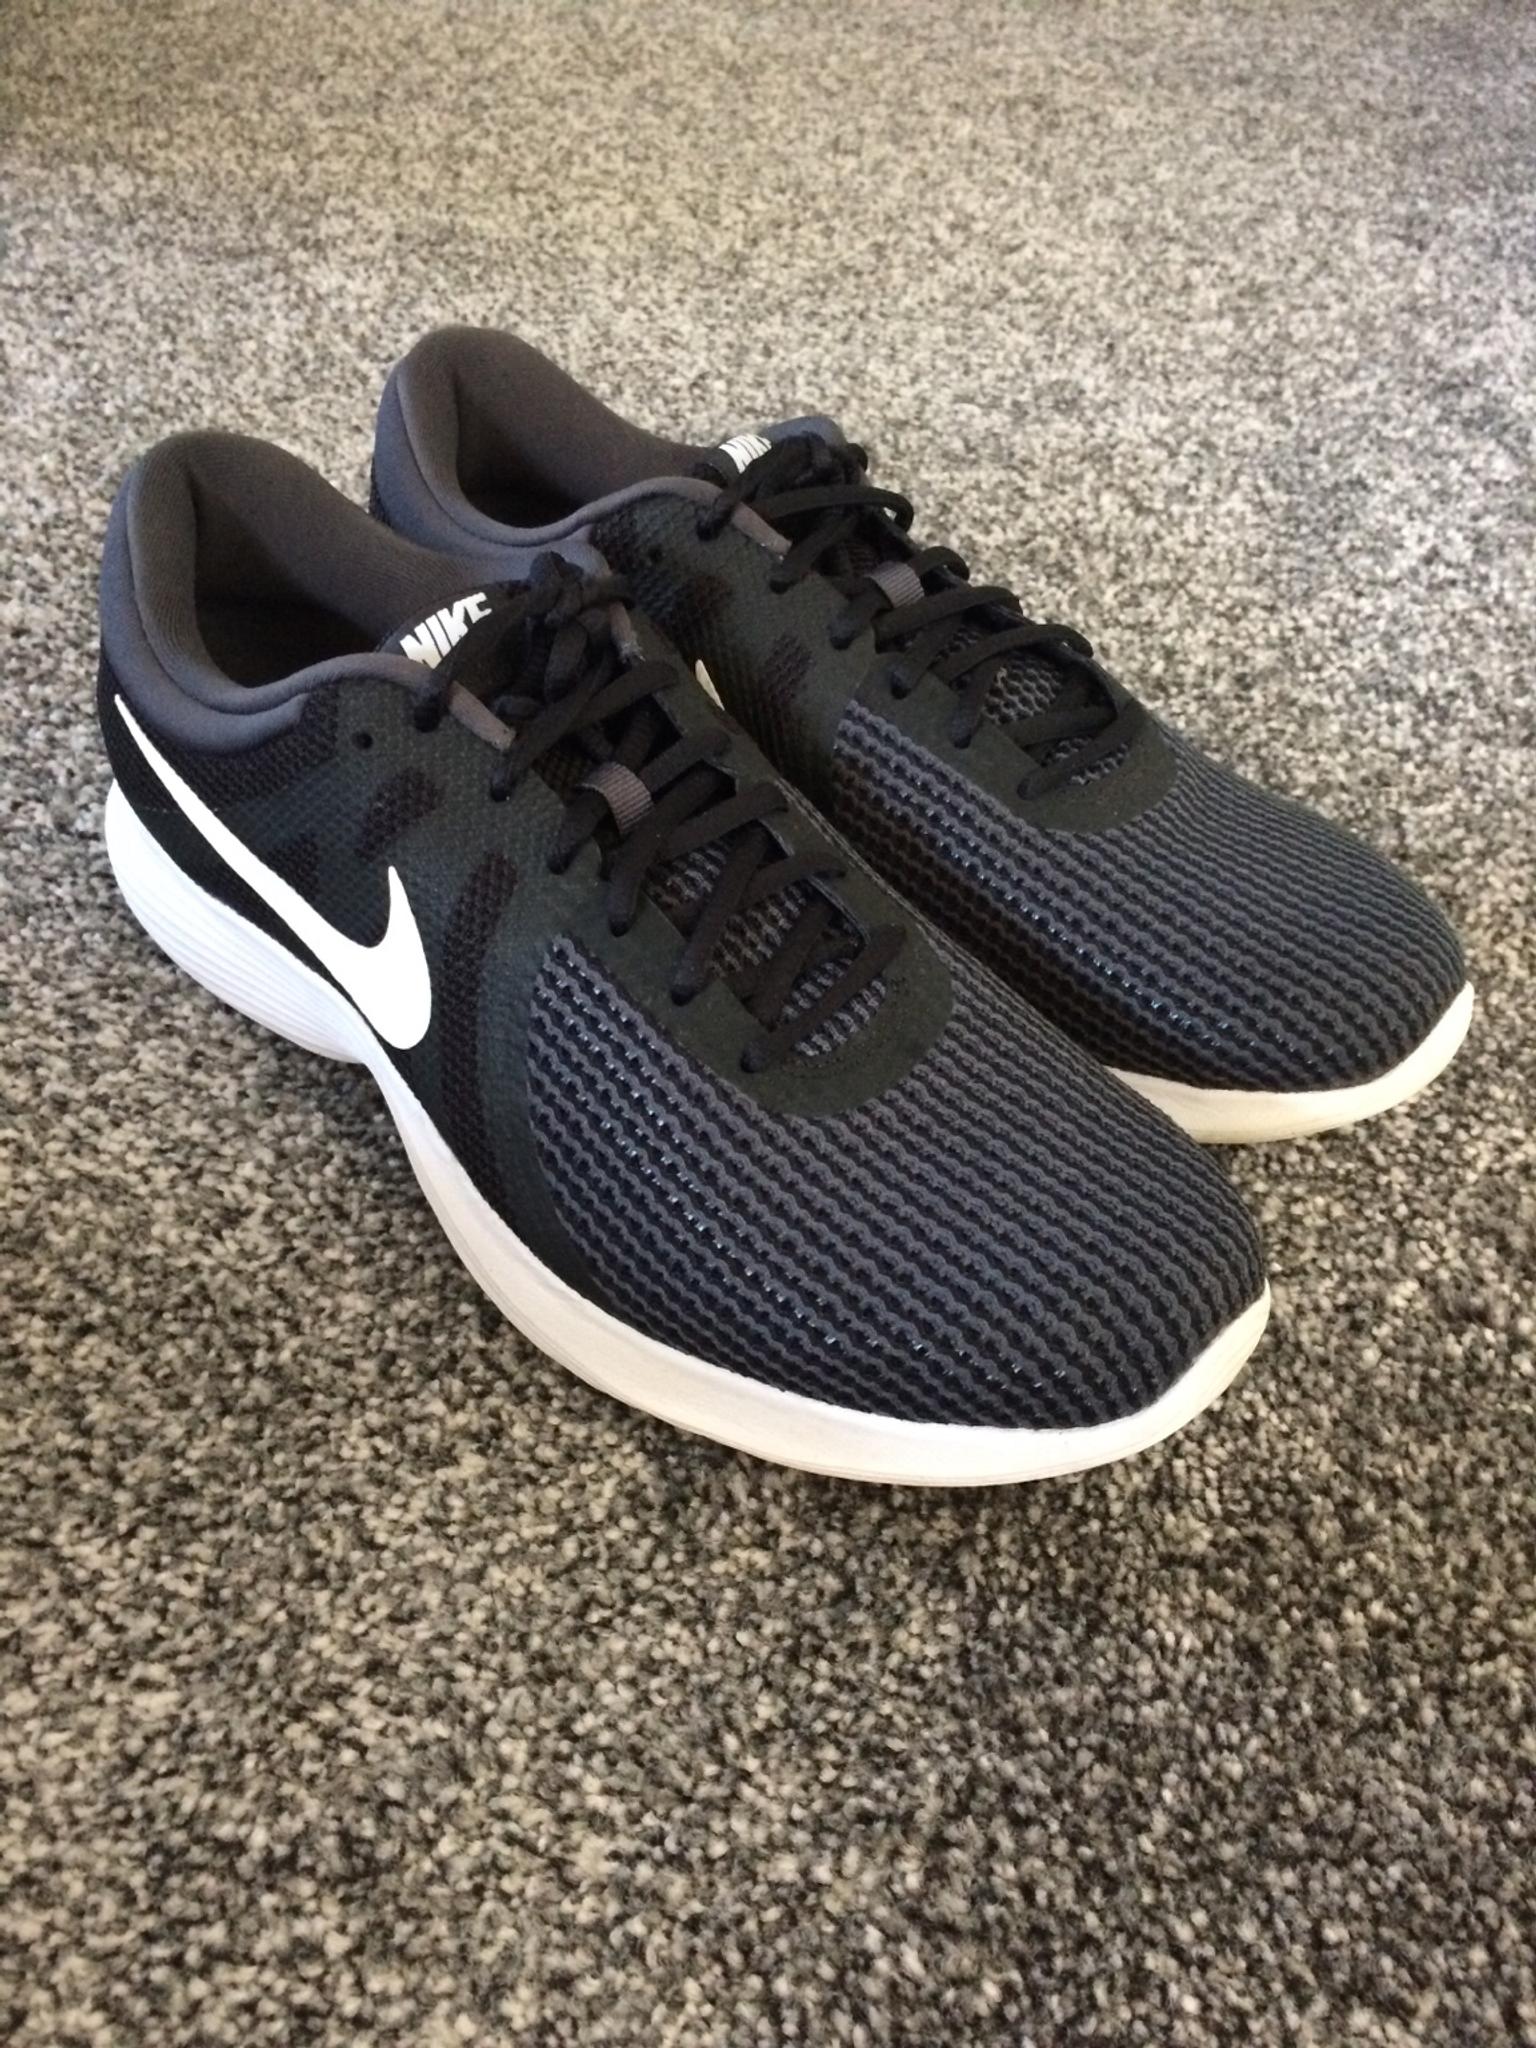 mens nike trainers size 10 sale